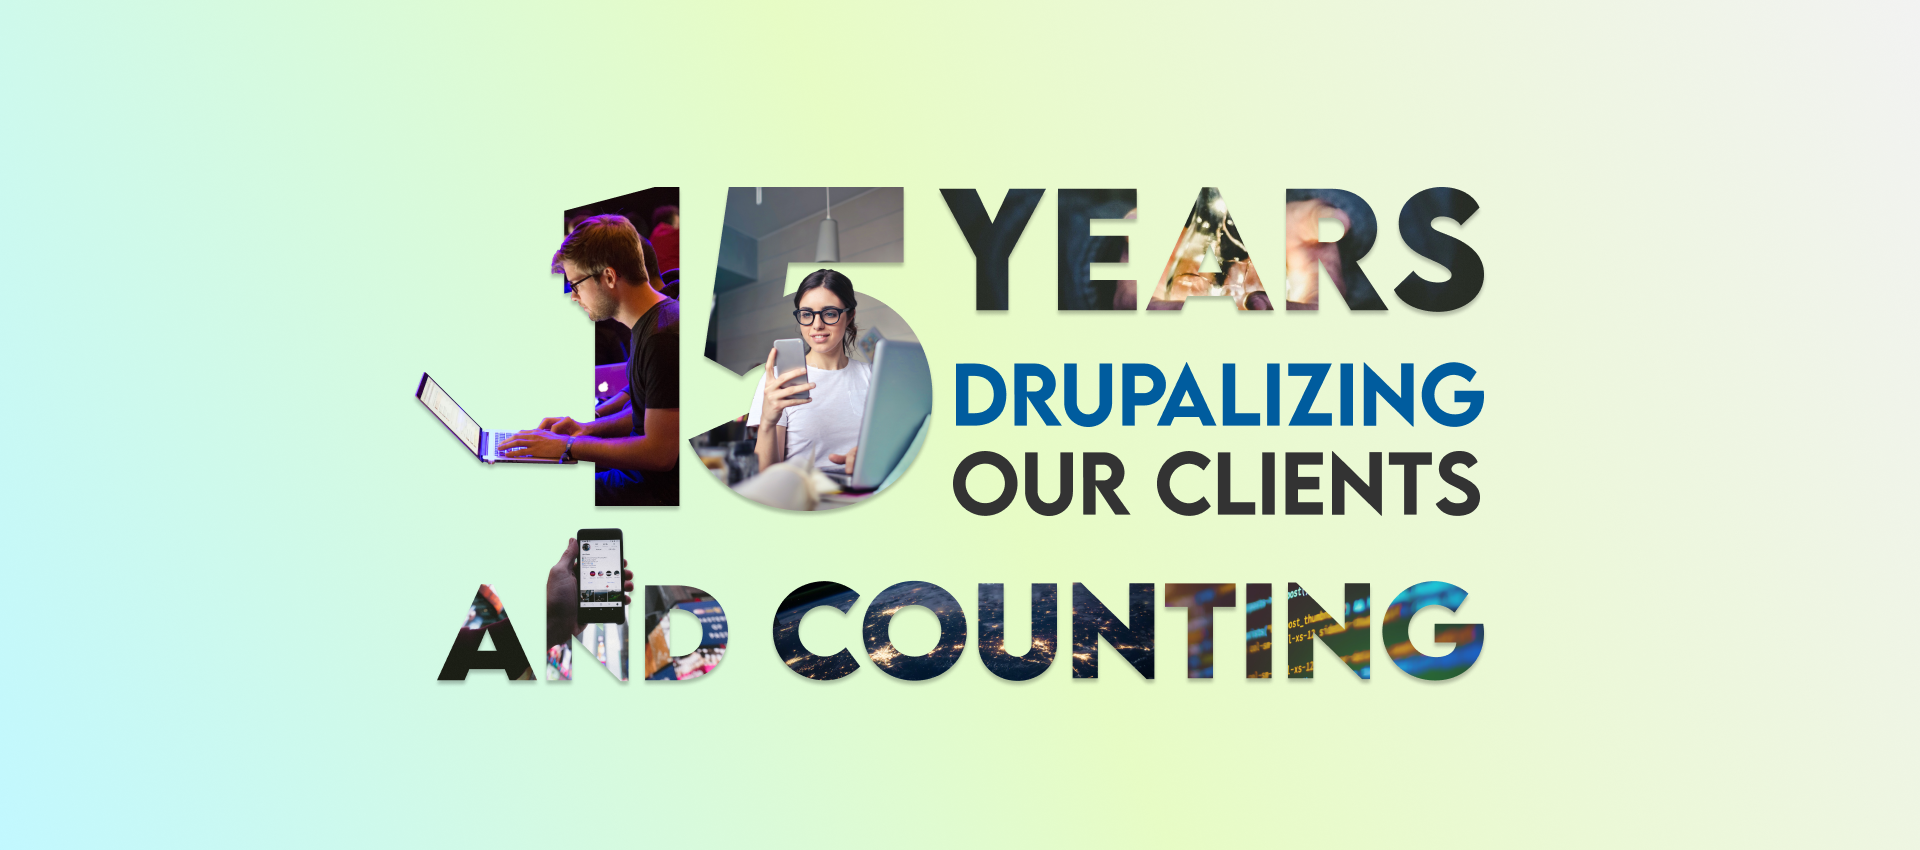 Image that contains the text: 15 years drupalizing our clients and counting